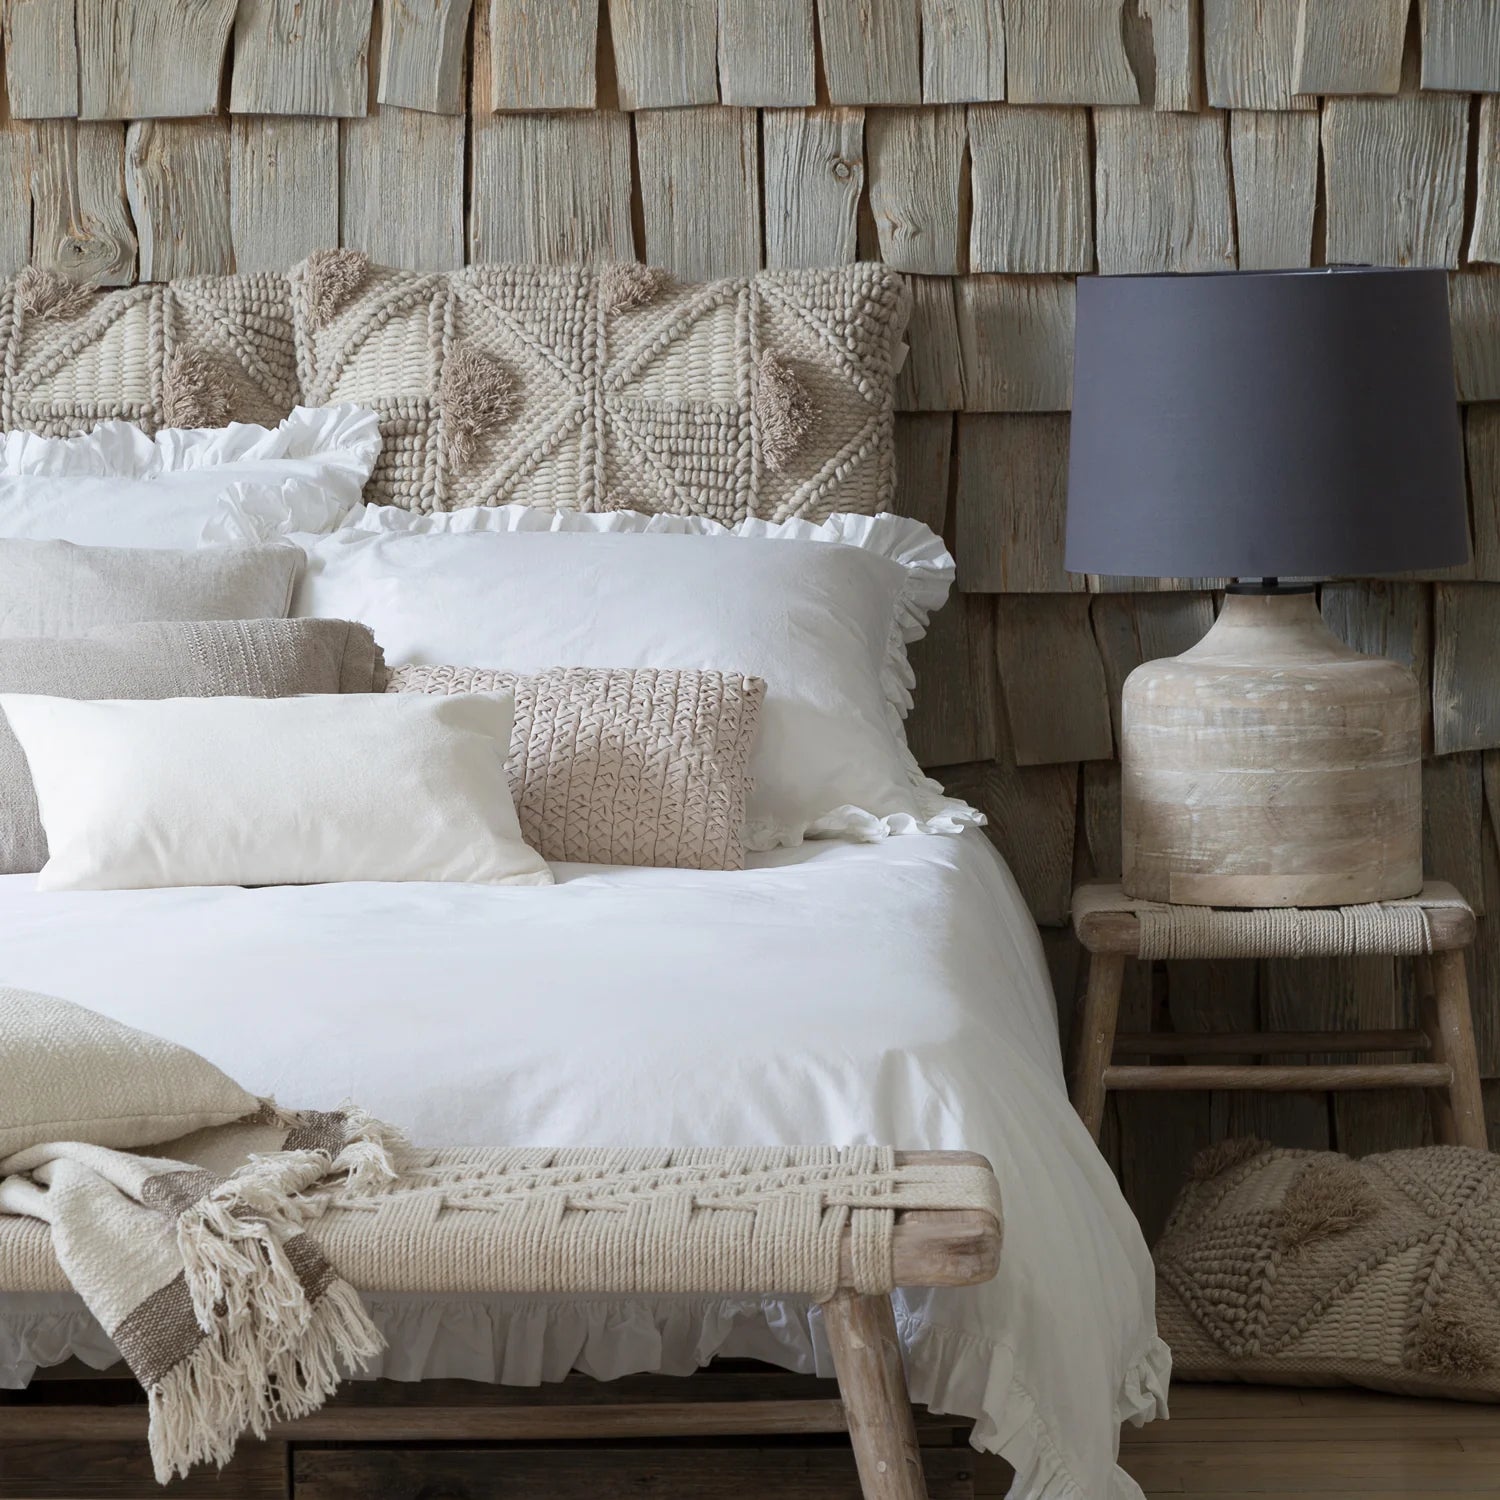 a rustic bedroom with wooden cladded wall and white frilly bedding, the woven bench is at the foot of the bed,